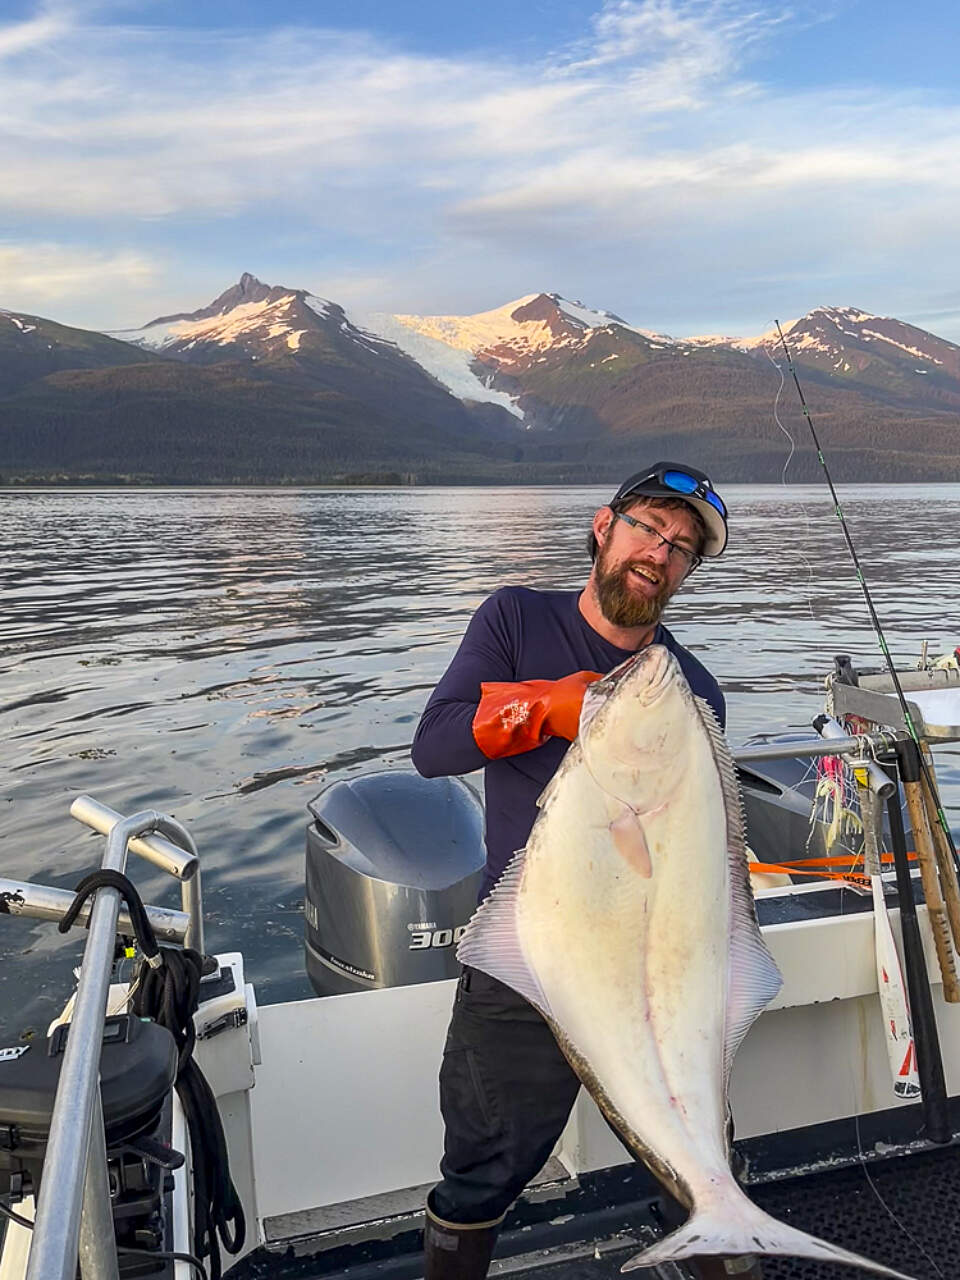 Experience the thrill of the catch with top-of-the-line equipment, targeting halibut, rockfish, lingcod, and salmon in the rich fishing grounds of Alaska's coastal waters, with the chance to bring home more than just memories